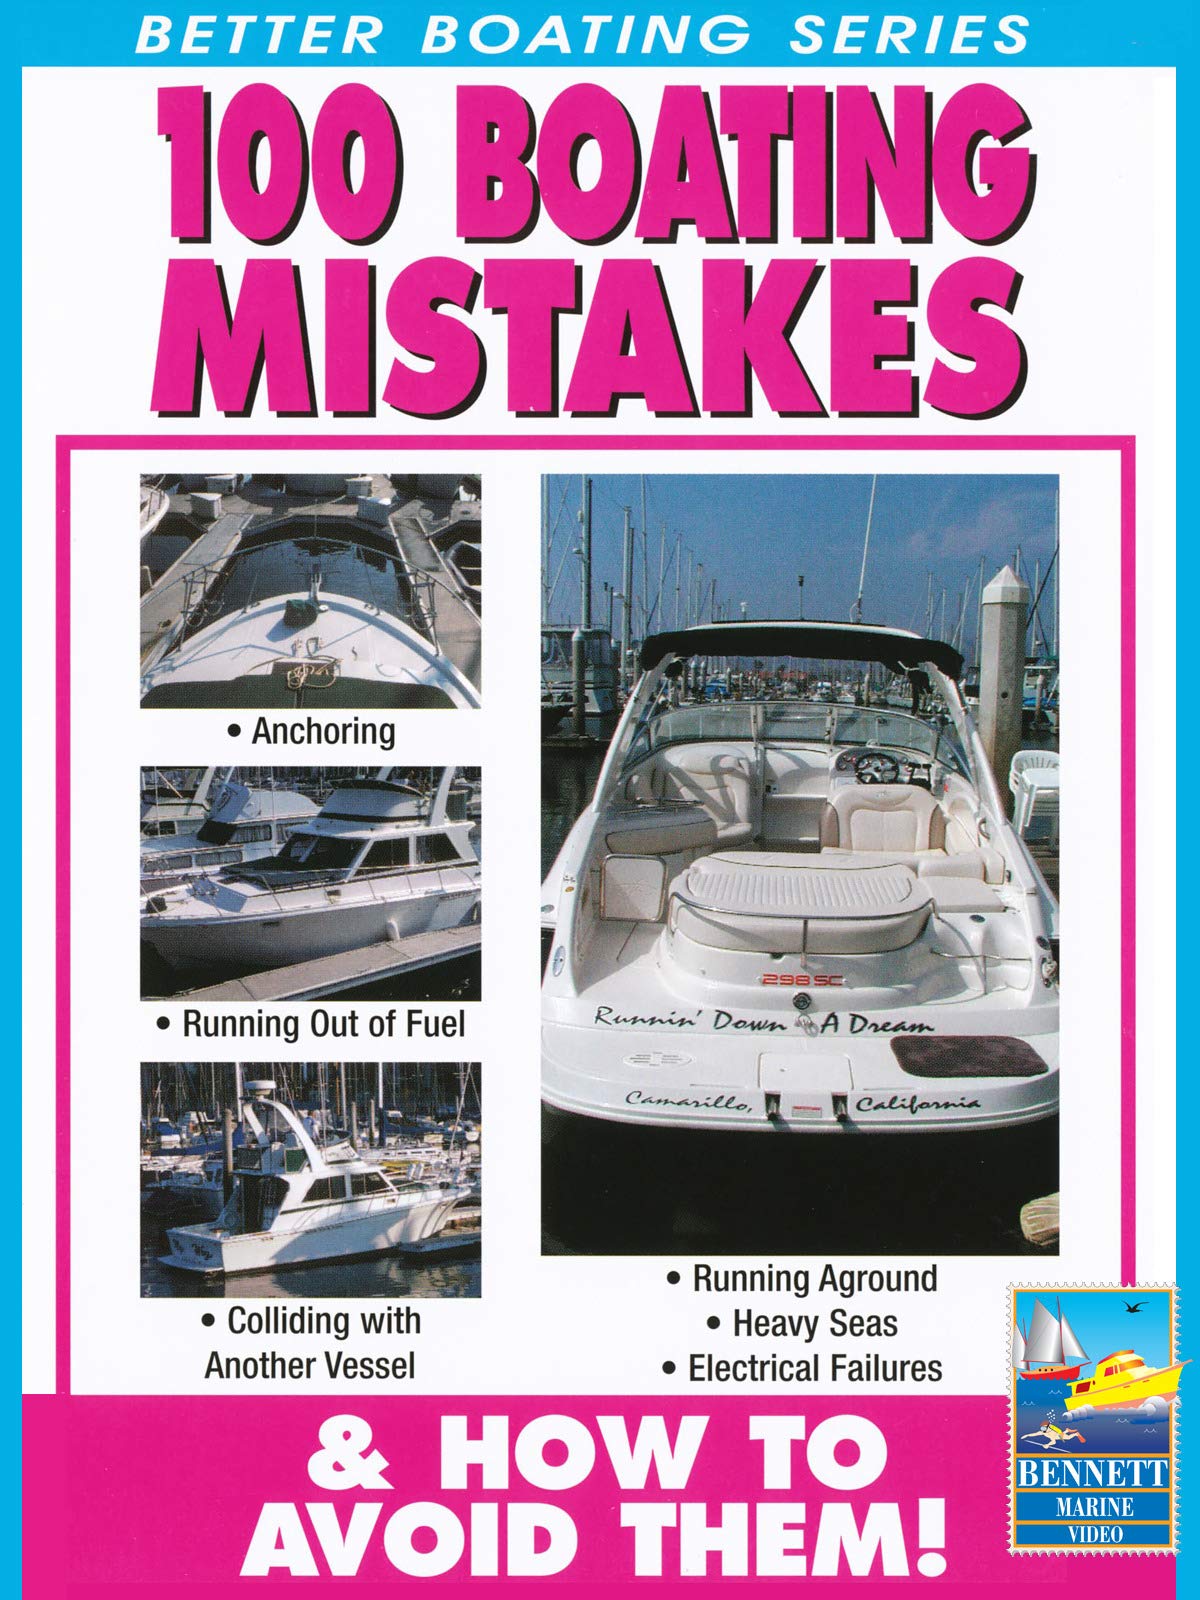 Better Boating Series: 100 Boating Mistakes and How to Avoid Them